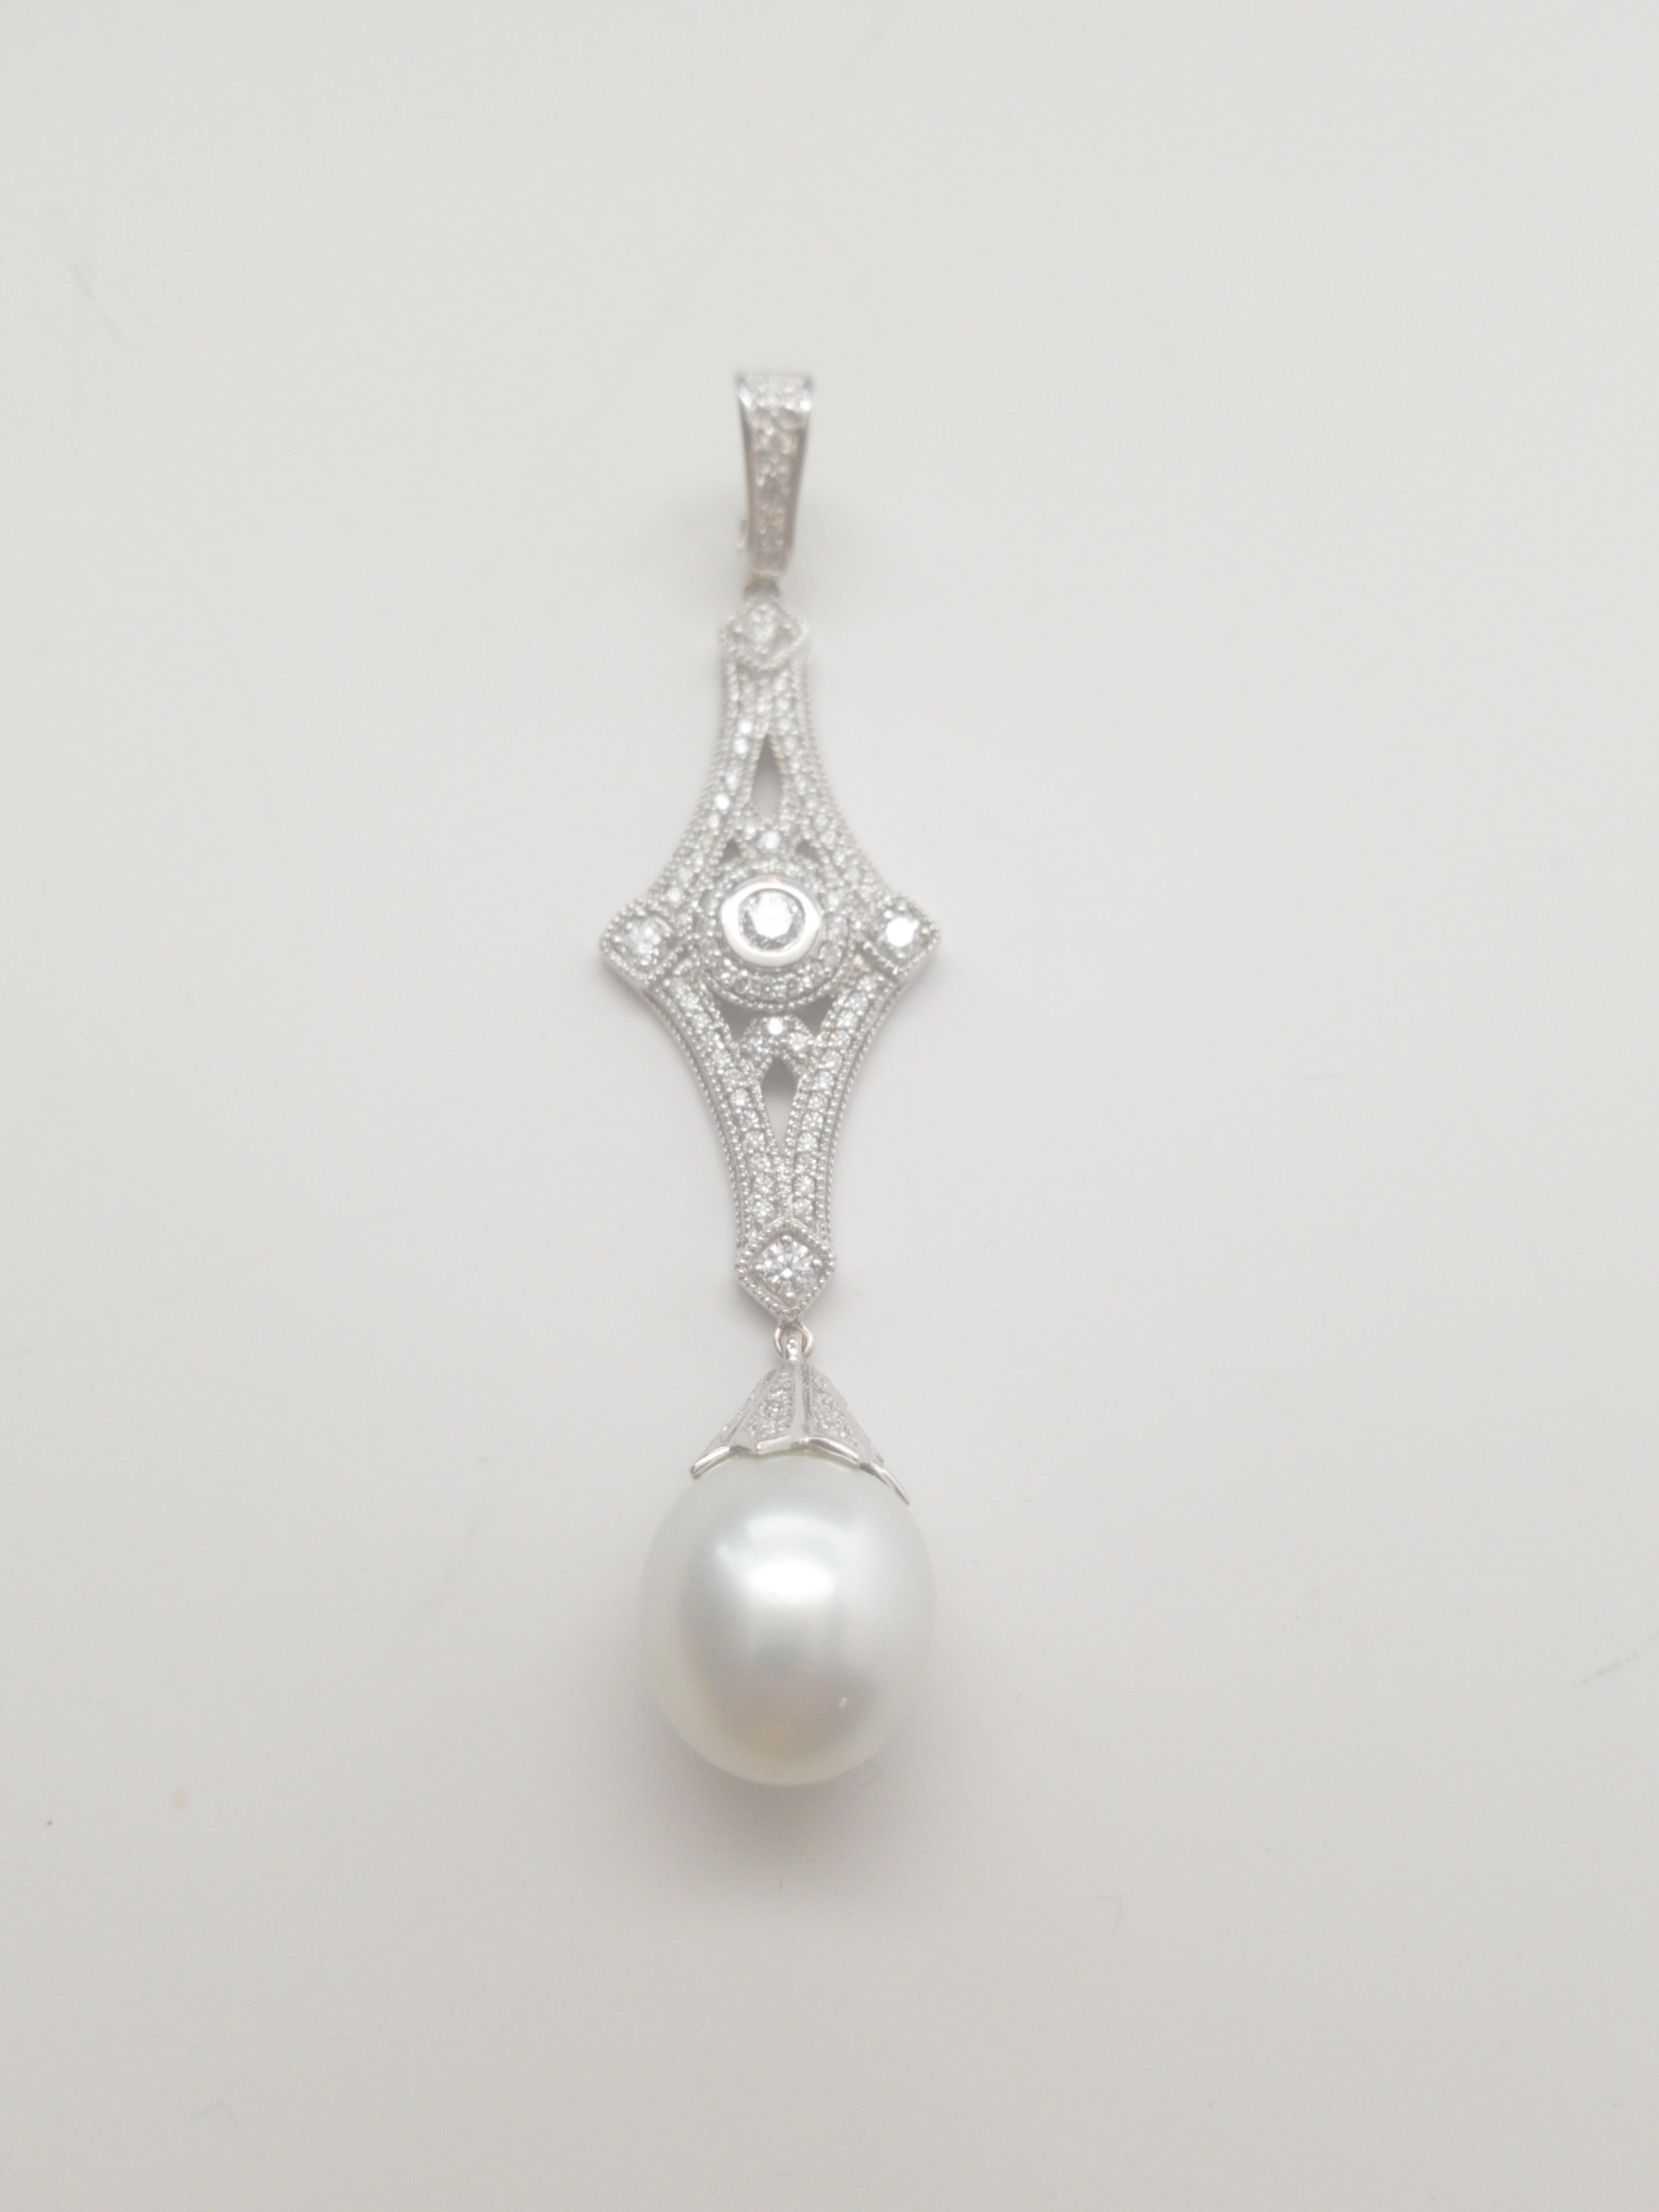 Introducing a breathtaking AAAA+ South Sea Pearl and Diamond Pendant in Platinum, featuring an Art Deco inspired style. Crafted by renowned brand LaFrancee, this pendant is a true masterpiece that exudes elegance and style. The pendant is made of